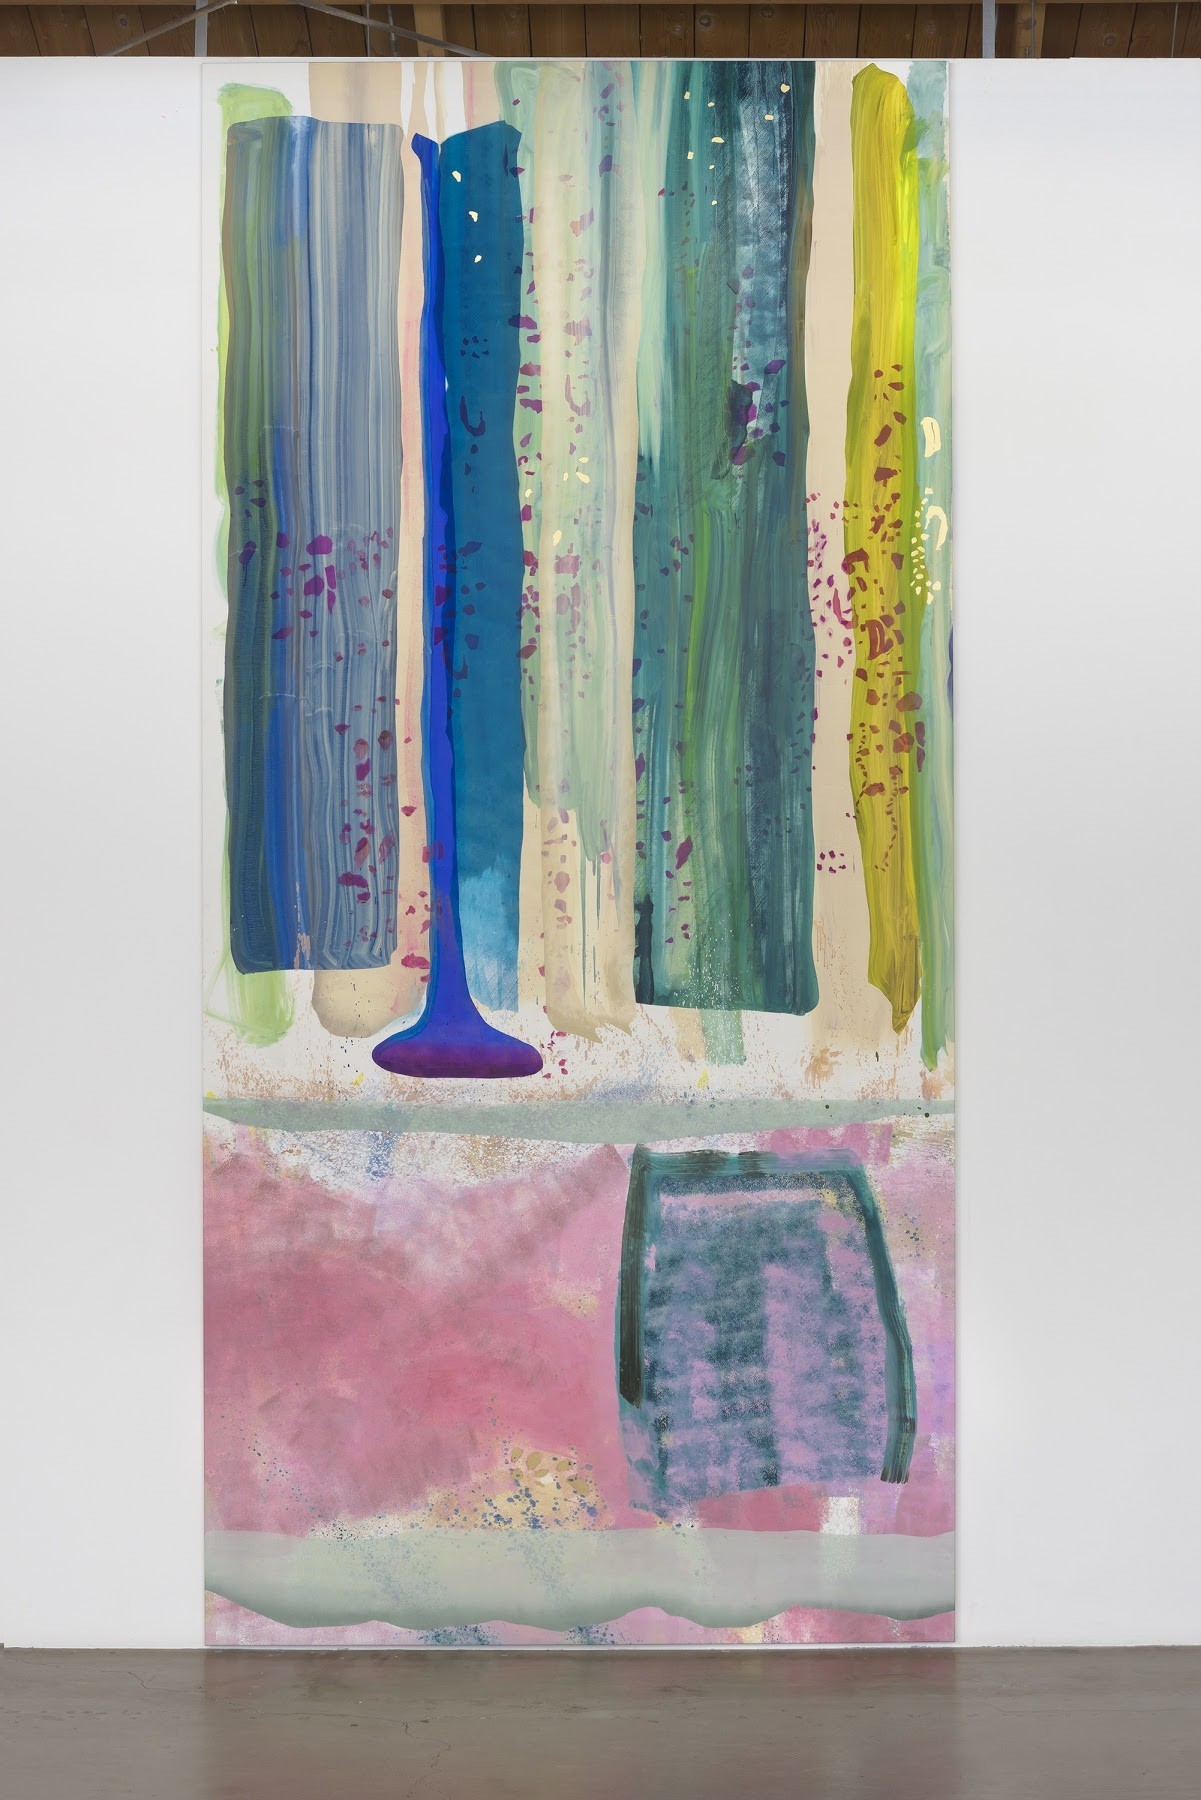 Monique Van Genderen, “Untitled,” 2017, oil and pigment on linen, 165 inches by 78 inches by 1.25 inches.